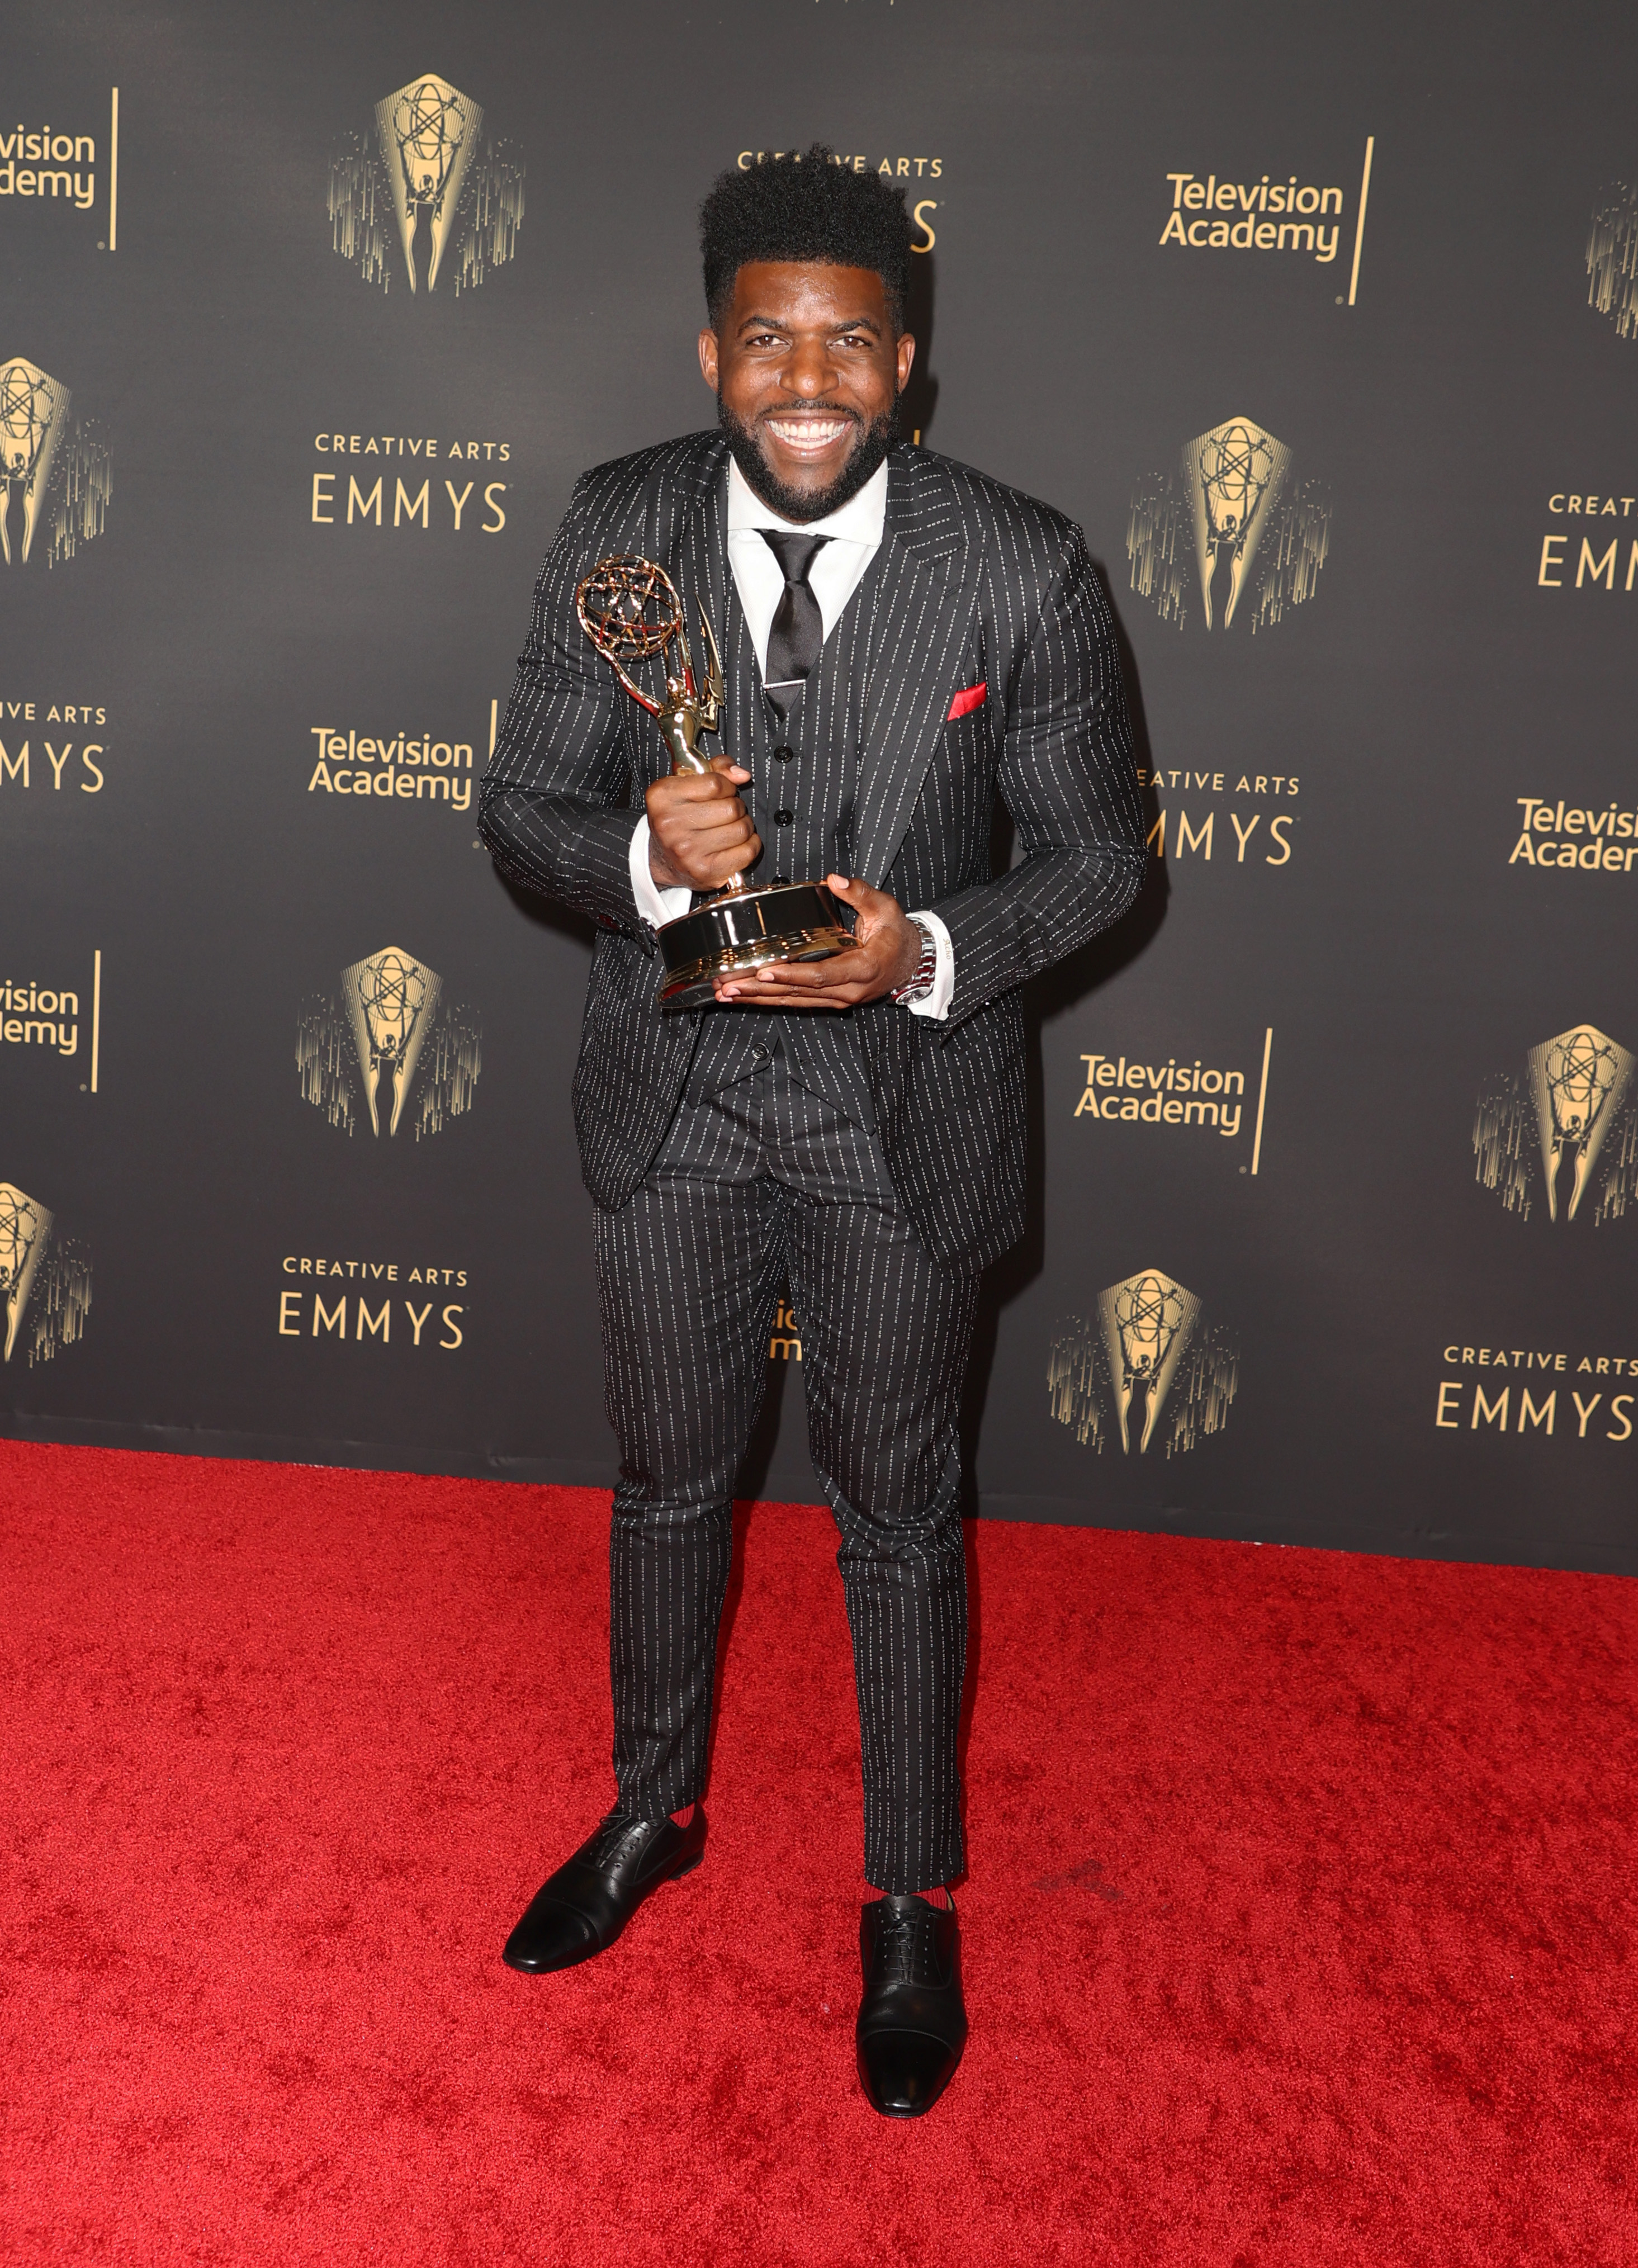 Creative Arts Emmy Awards 21 See The Complete List Of Winners Kiro 7 News Seattle